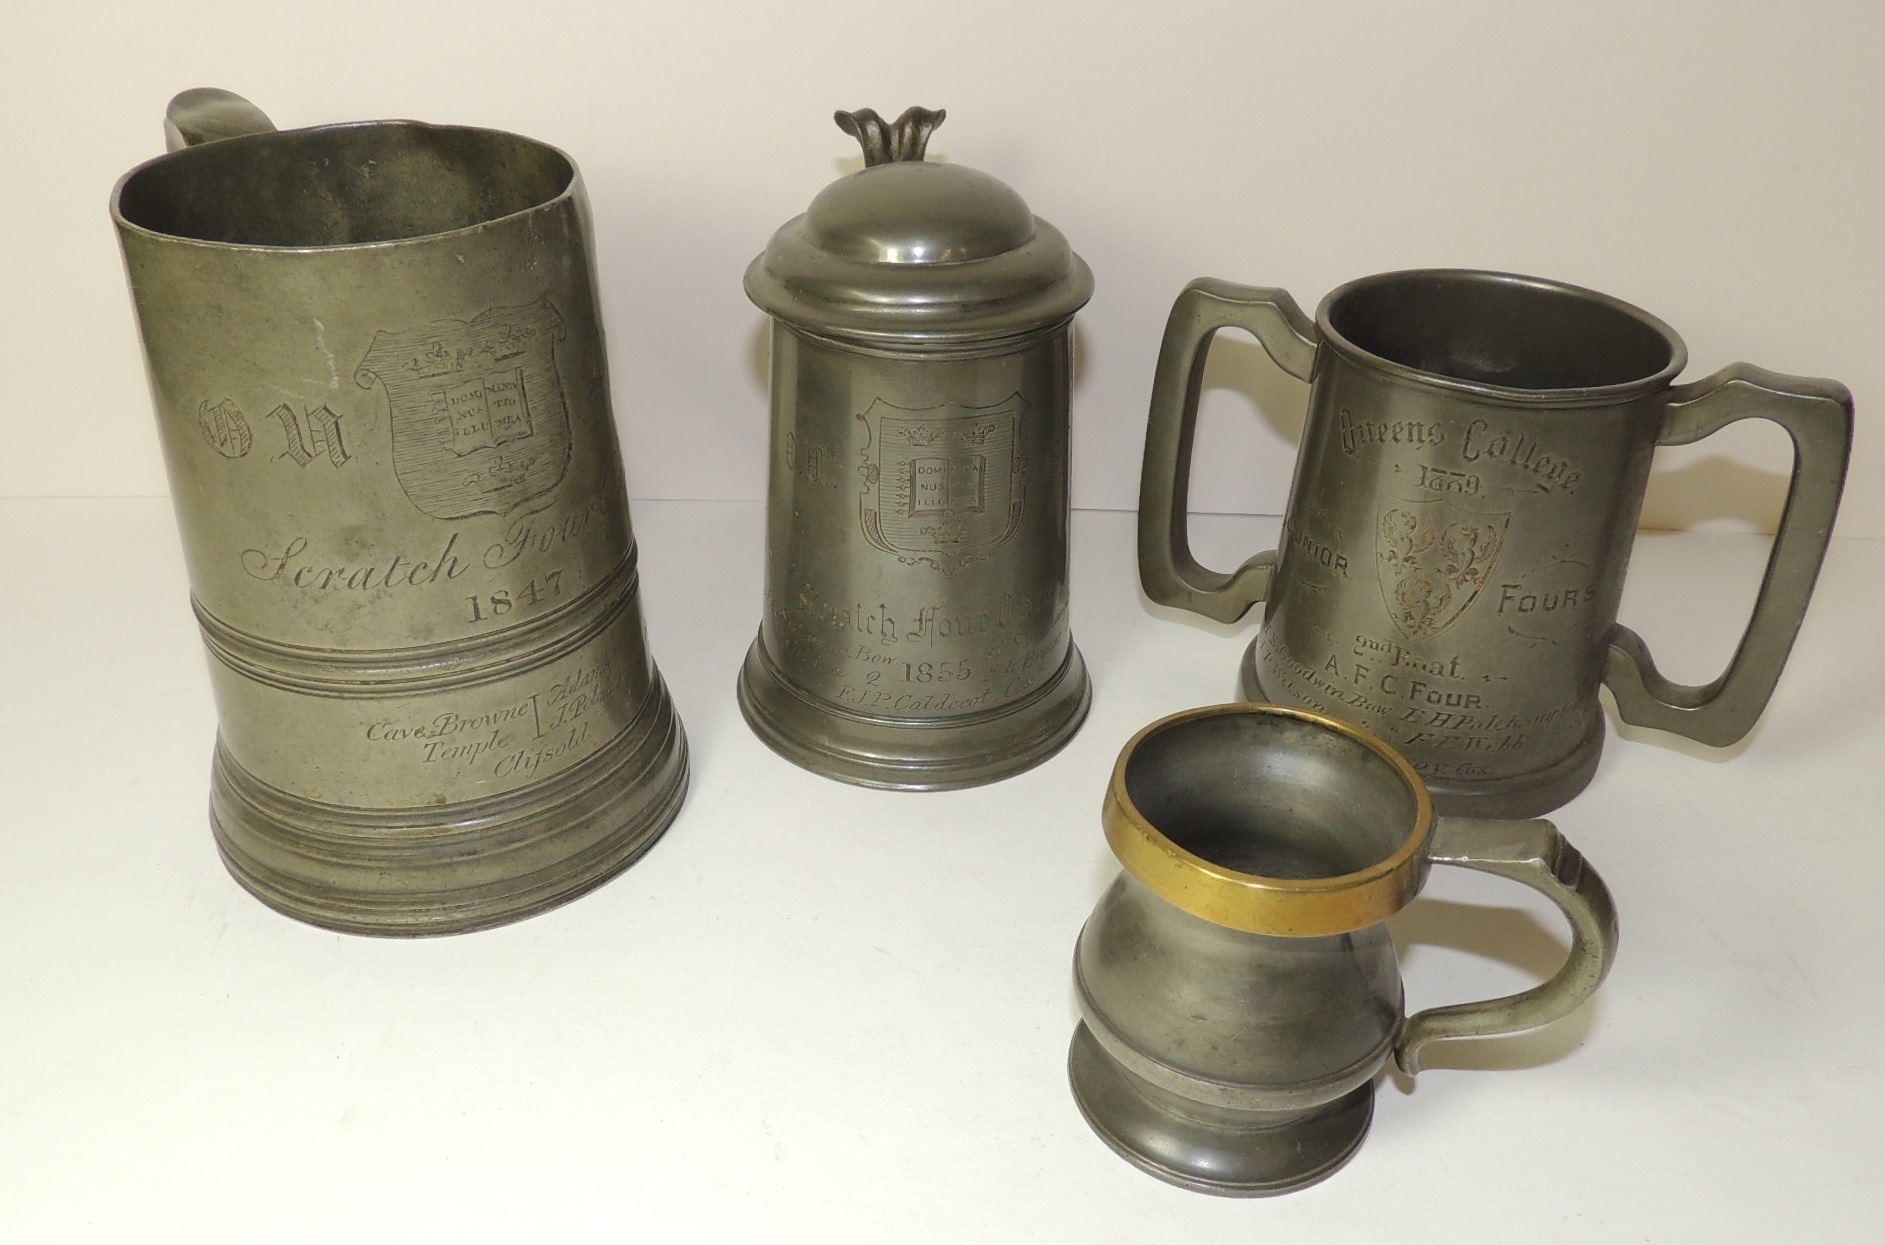 ROWING - Pewter rowing trophies: OUBC (Oxford Union Boat Club)  Scratch Fours 1847 and 1855;